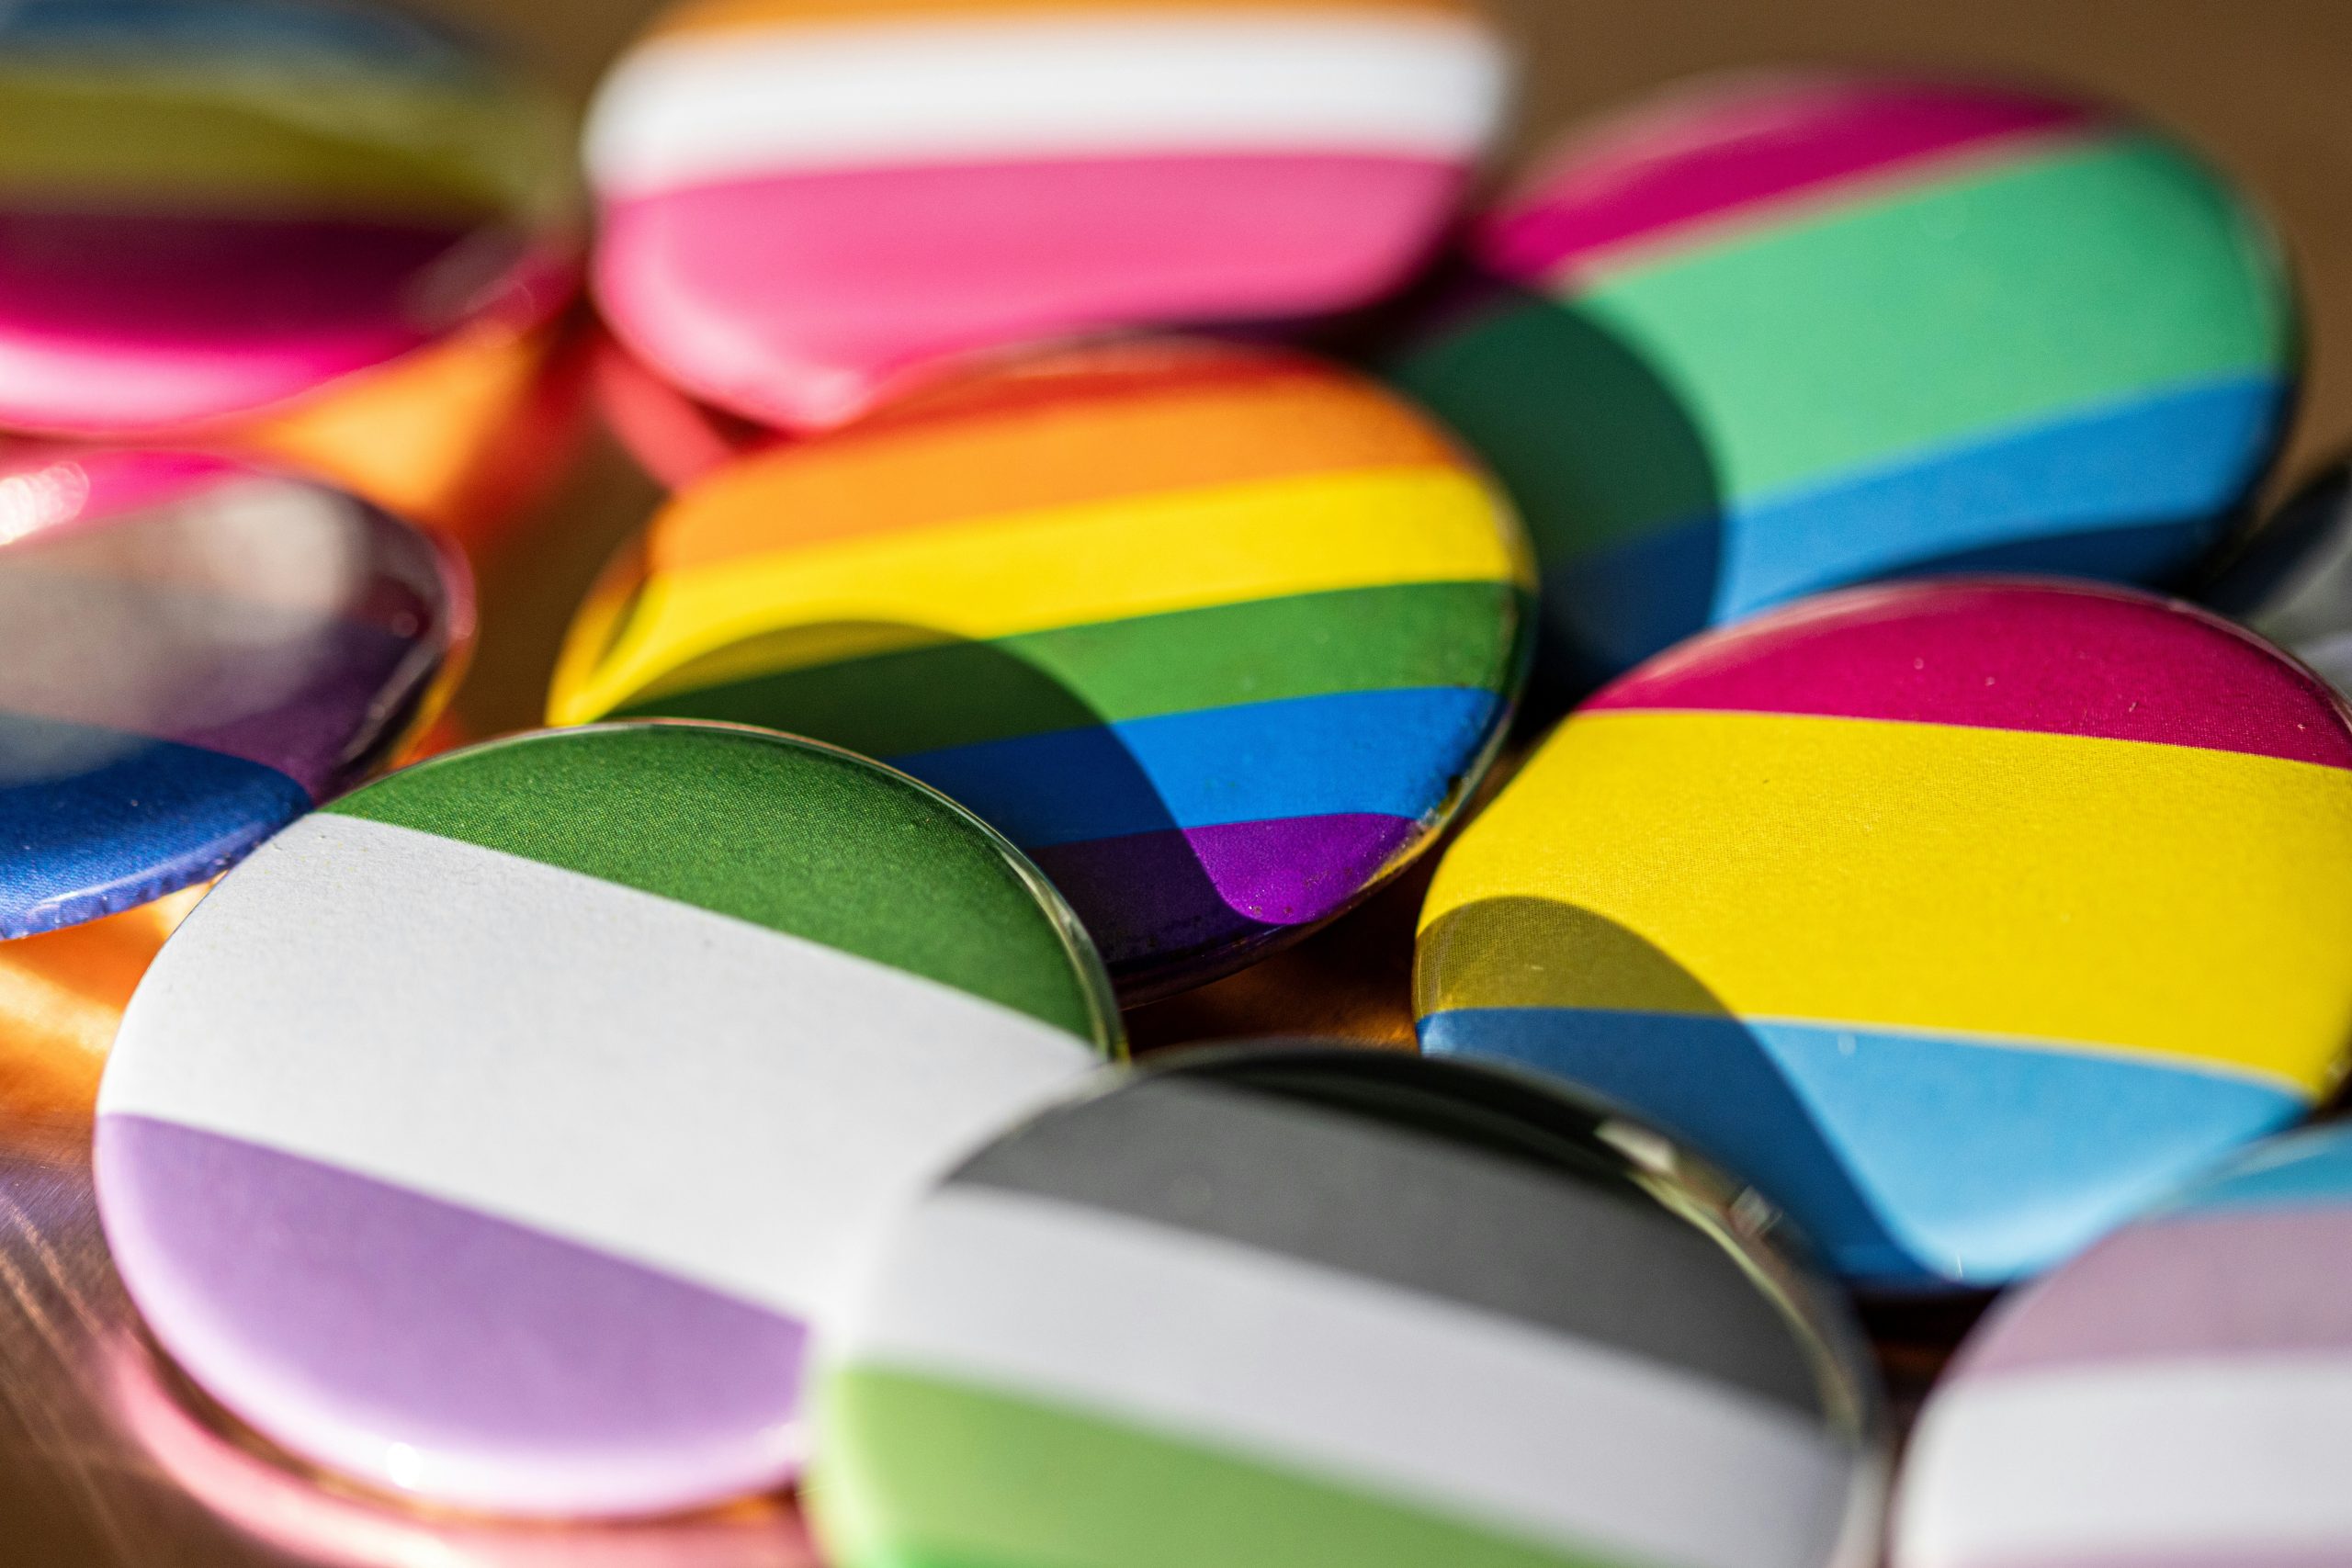 A series of buttons depicting various Pride flags including agender, aromantic, the rainbow flag, pansexual, lesbian, and more